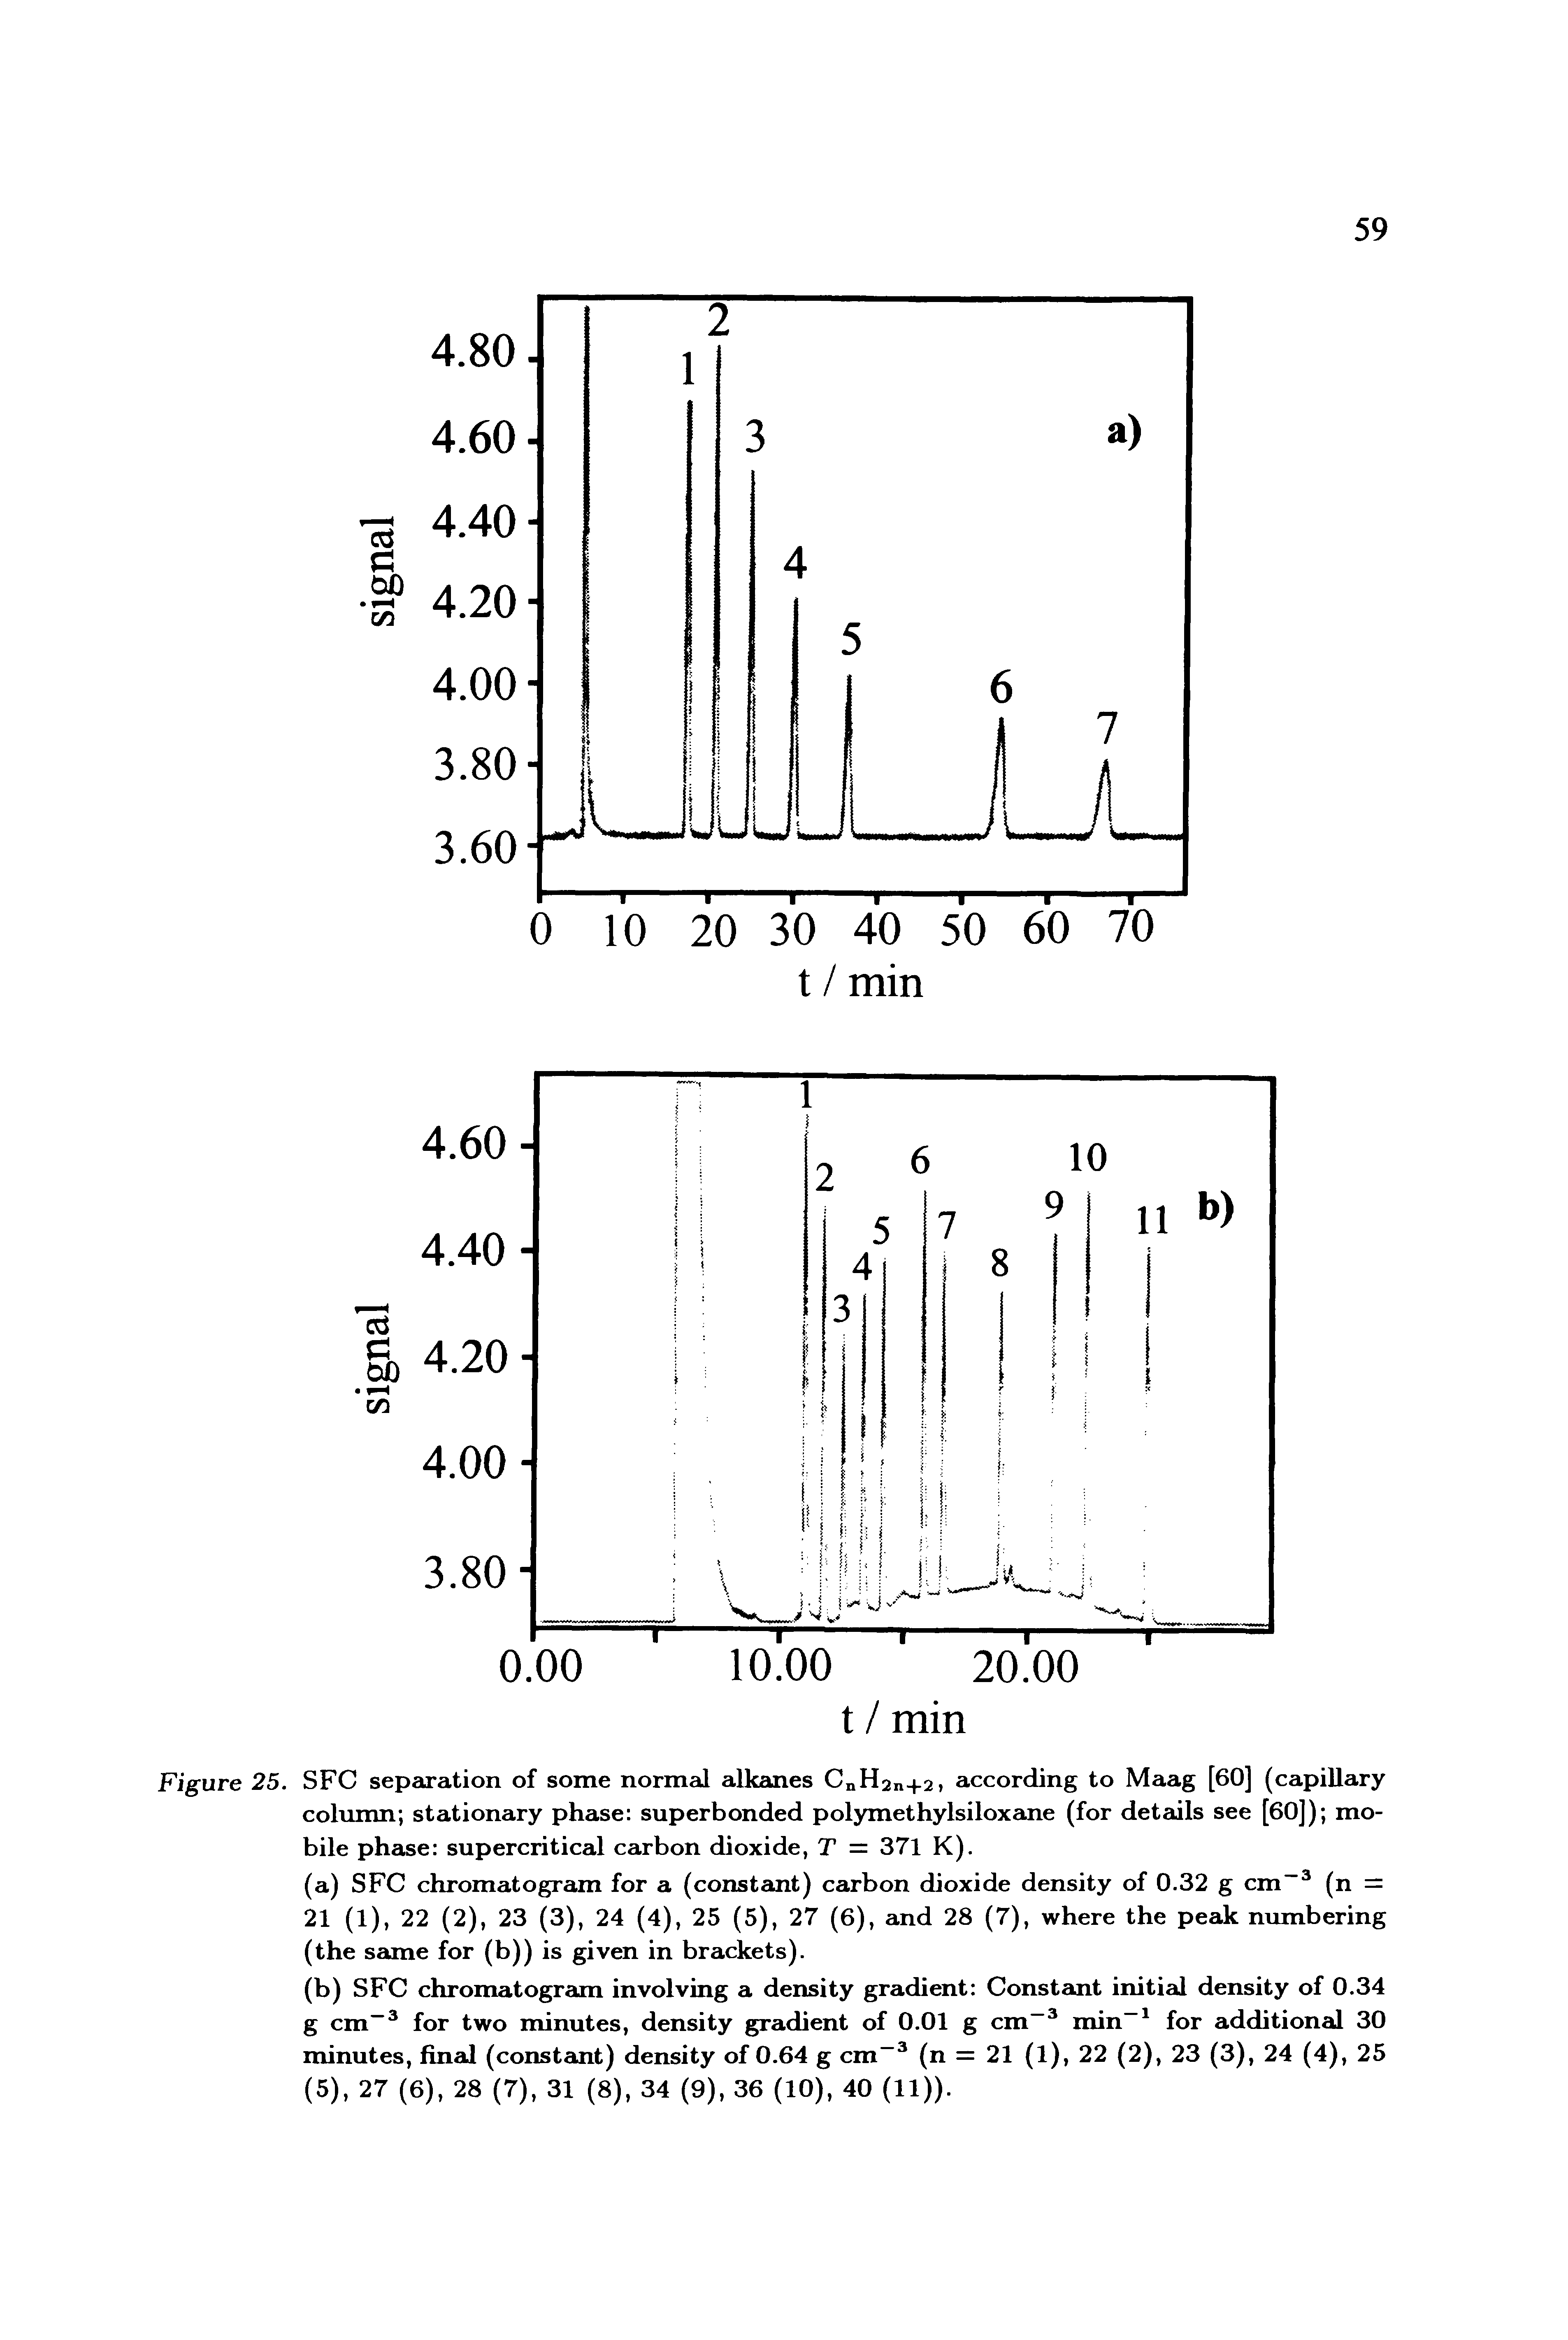 Figure 25. SFC separation of some normal alkanes CnH2n+2, according to Maag [60] (capillary column stationary phase superbonded polymethylsiloxane (for details see [60]) mobile phase supercritical carbon dioxide, T = 371 K).